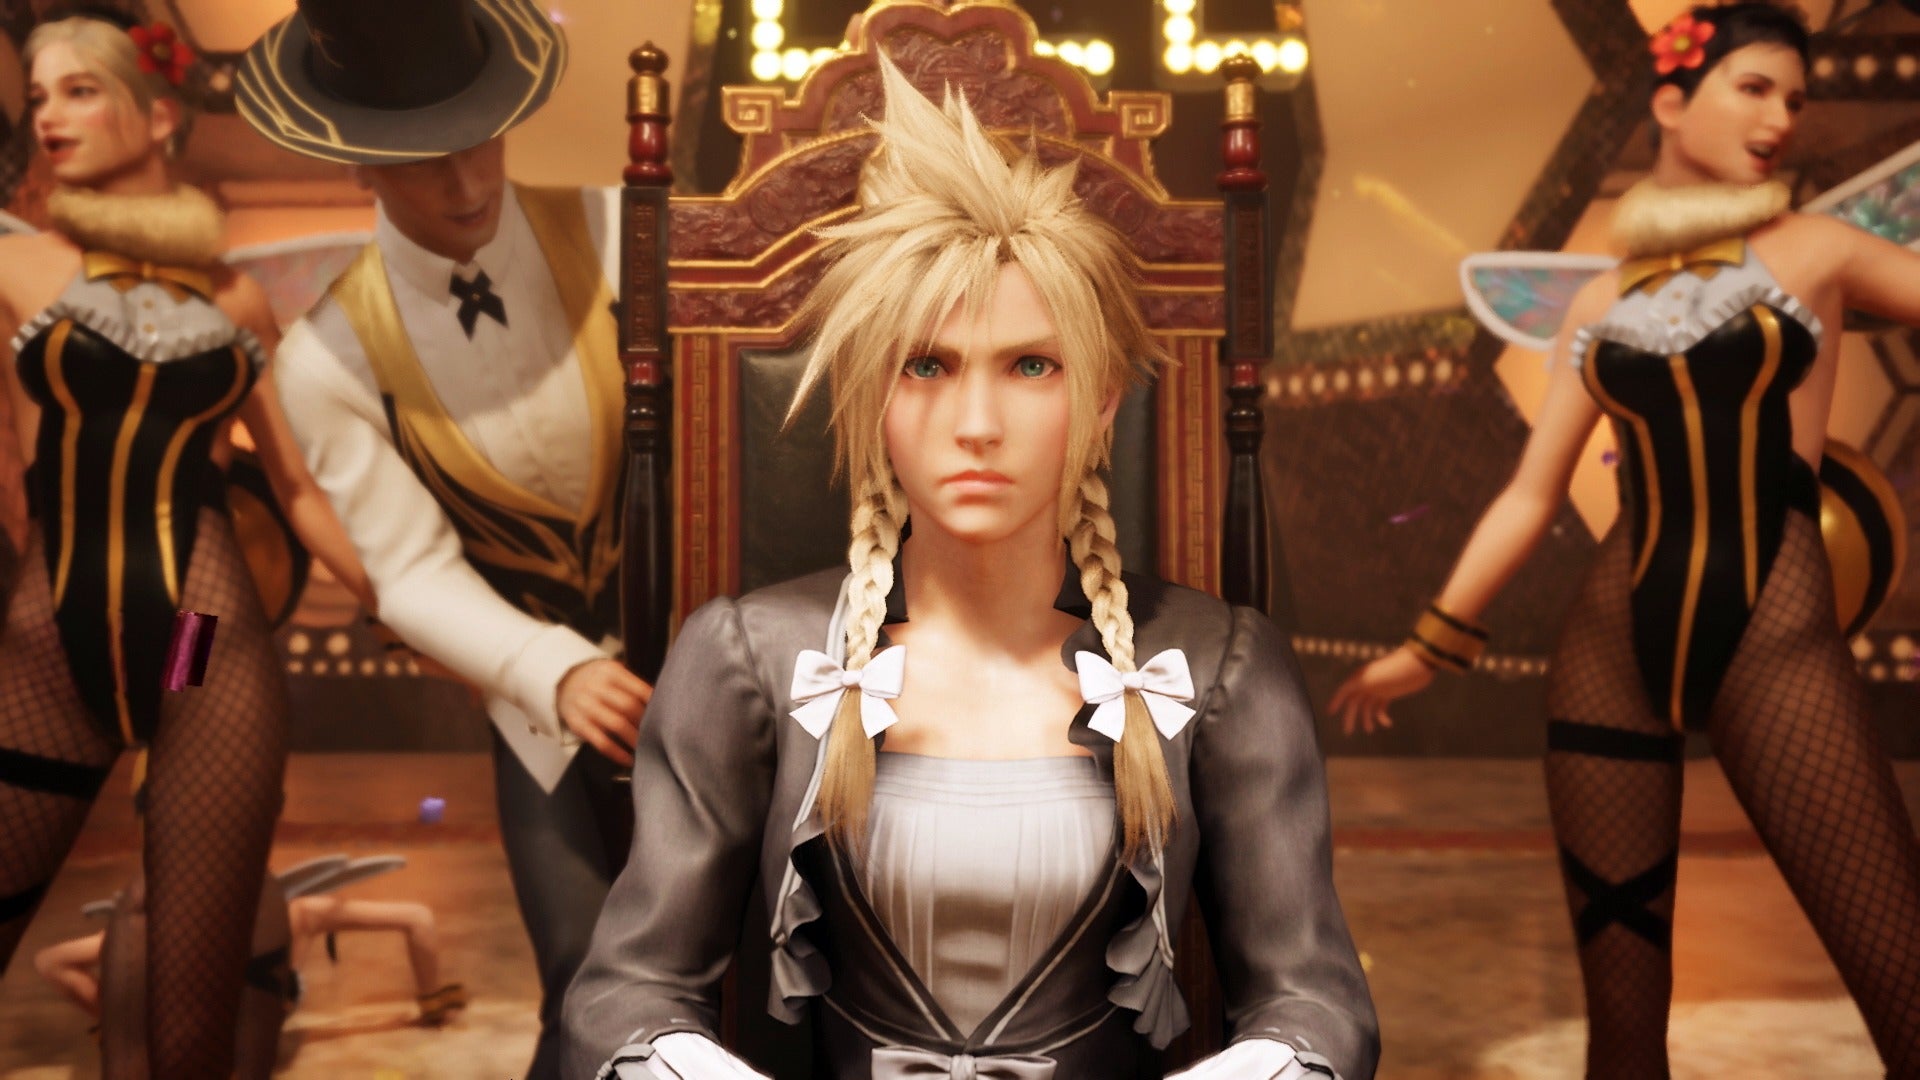 Cloud Looks So Fantastic In A Dress In These Final Fantasy VII